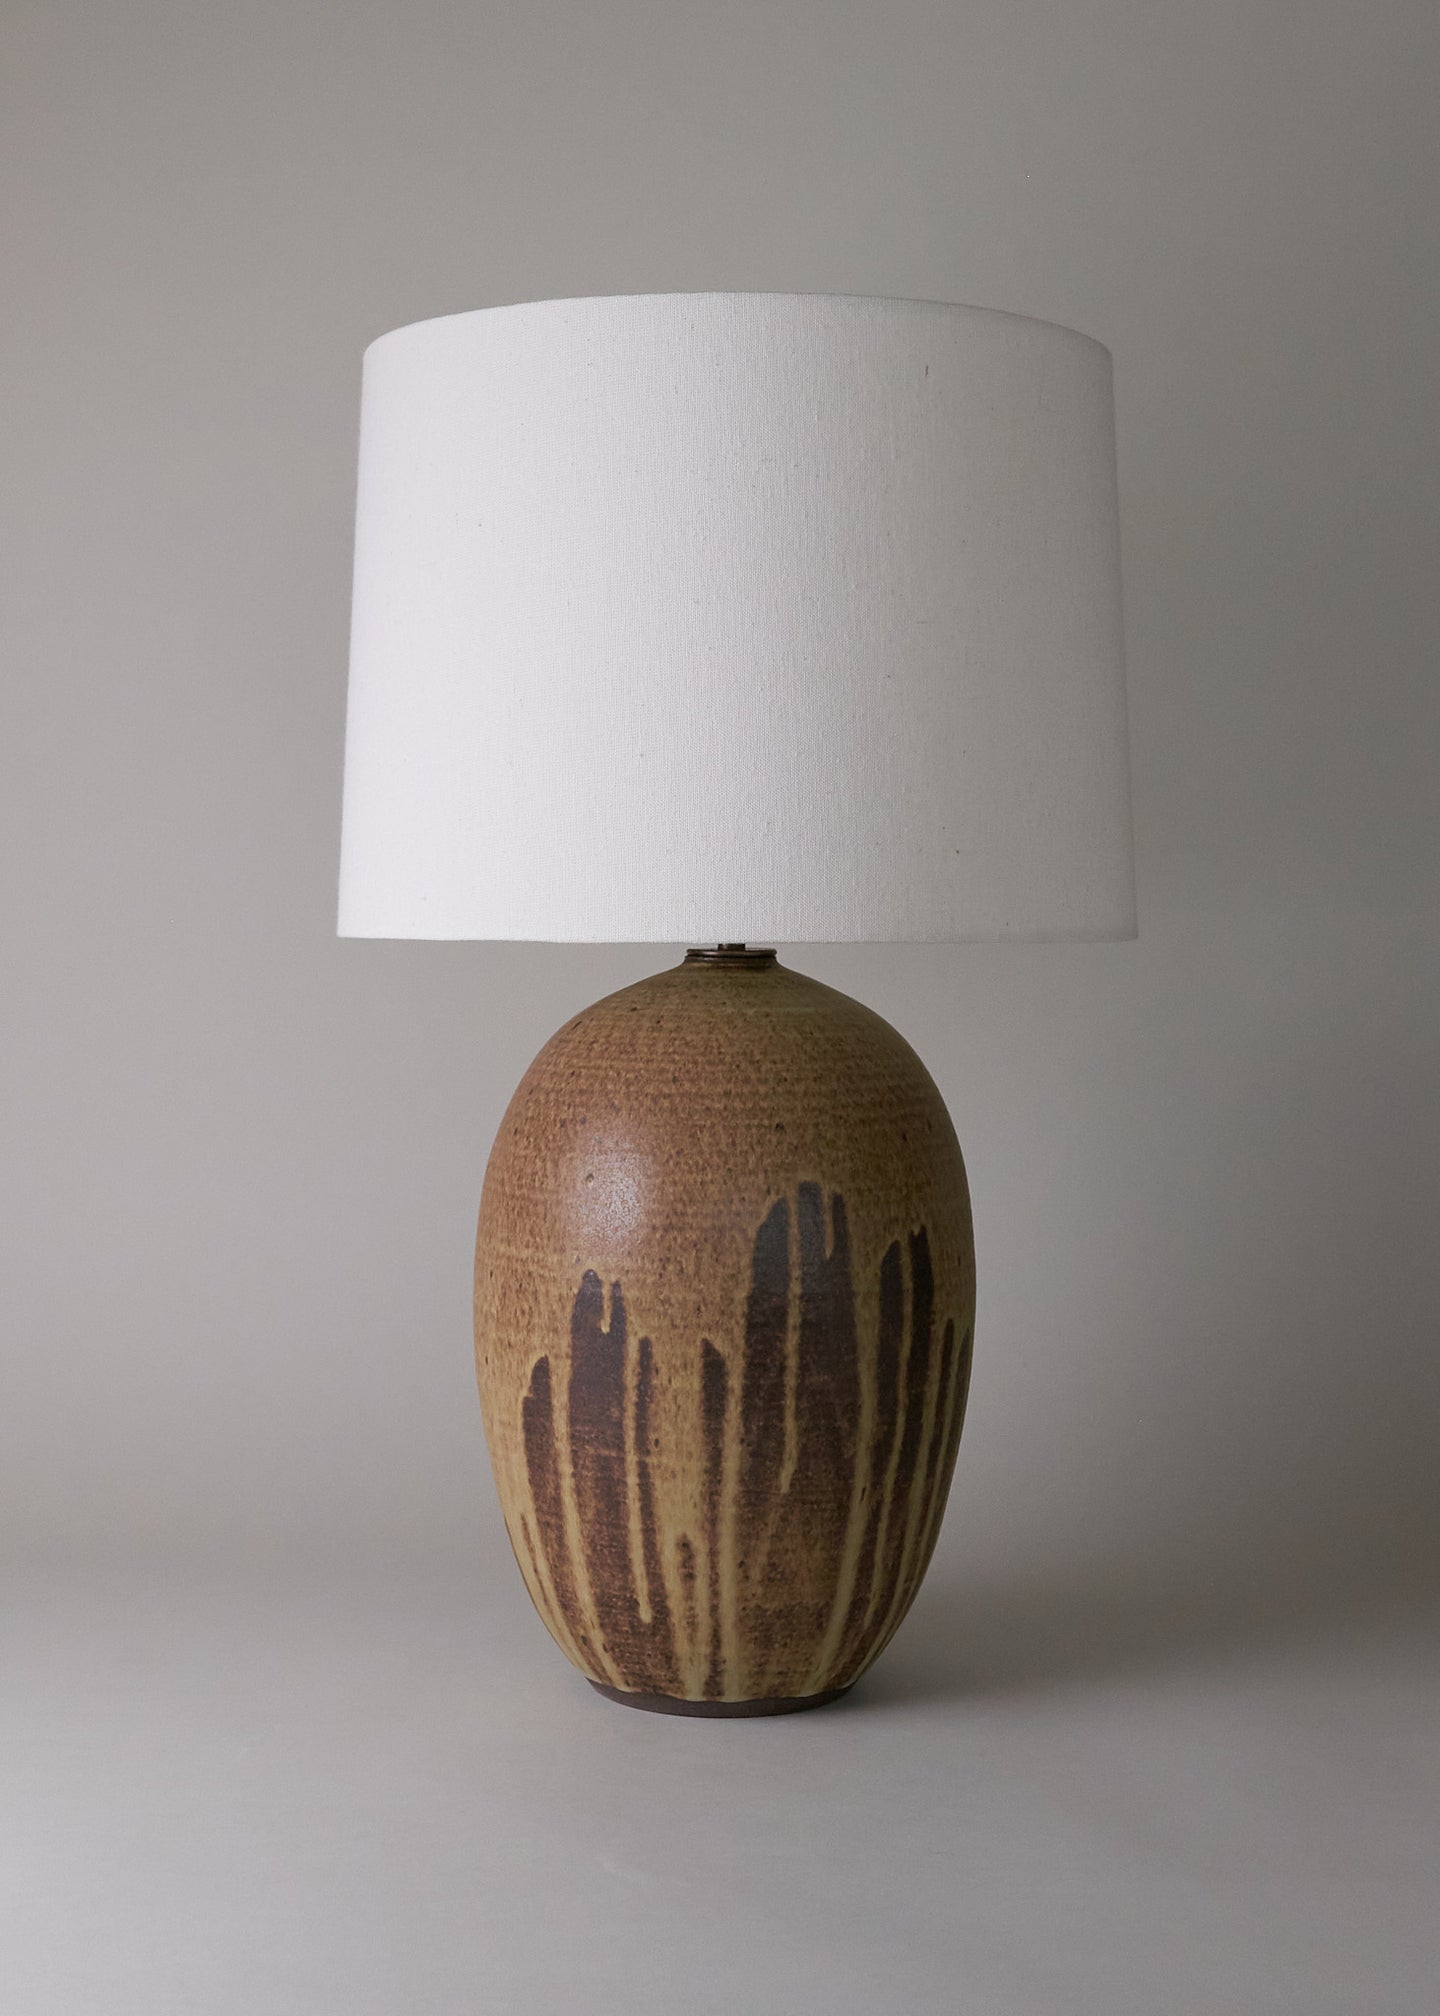 Large Oval Lamp in Live Oak - Victoria Morris Pottery